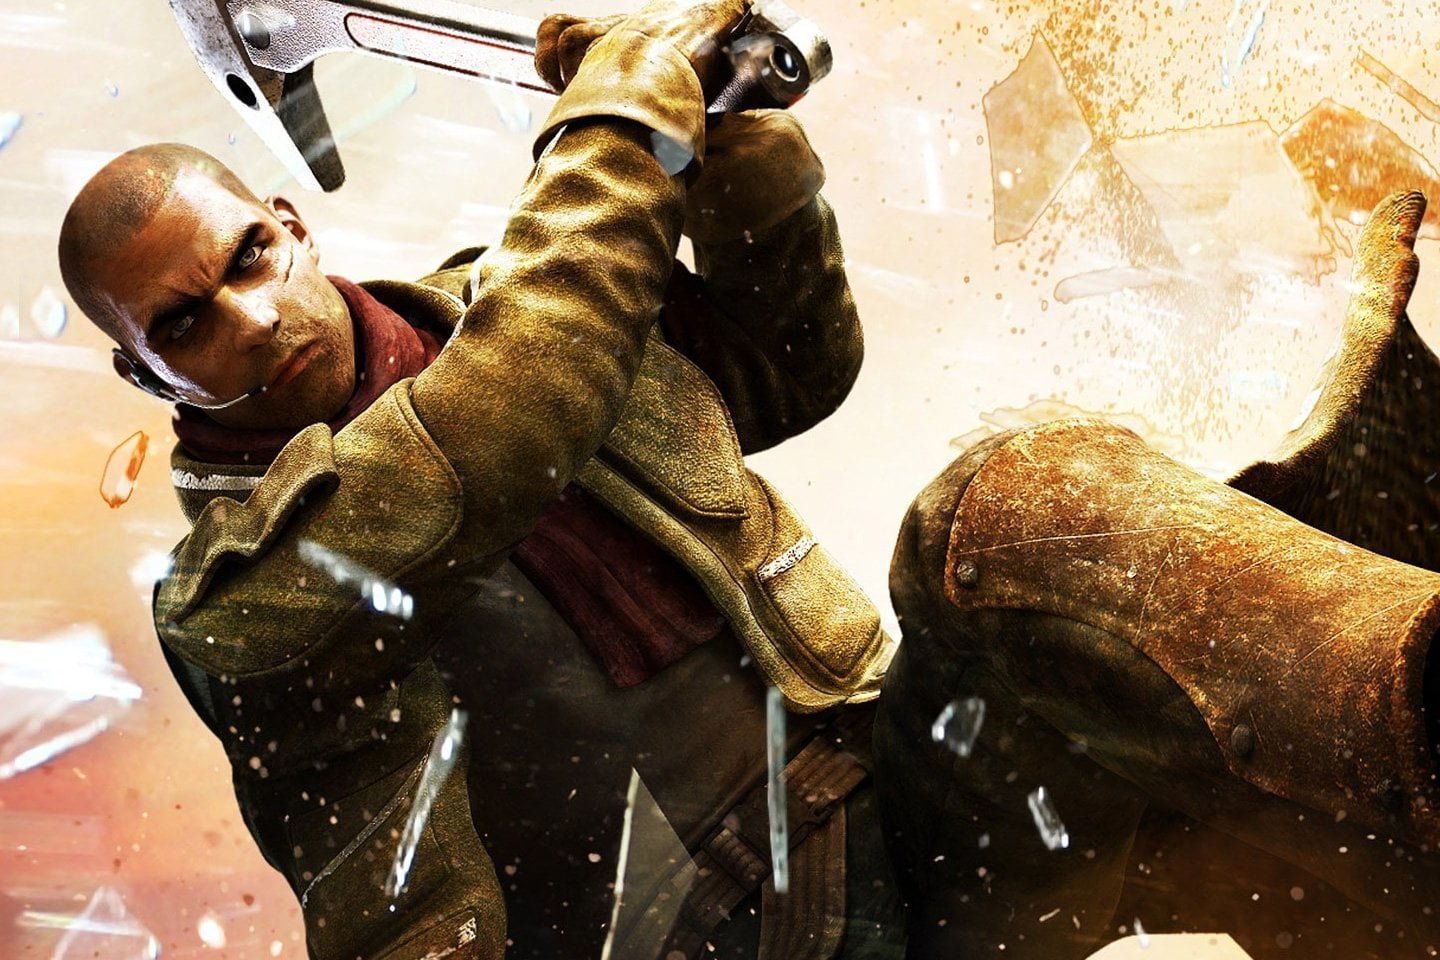 Review – Red Faction: Guerrilla